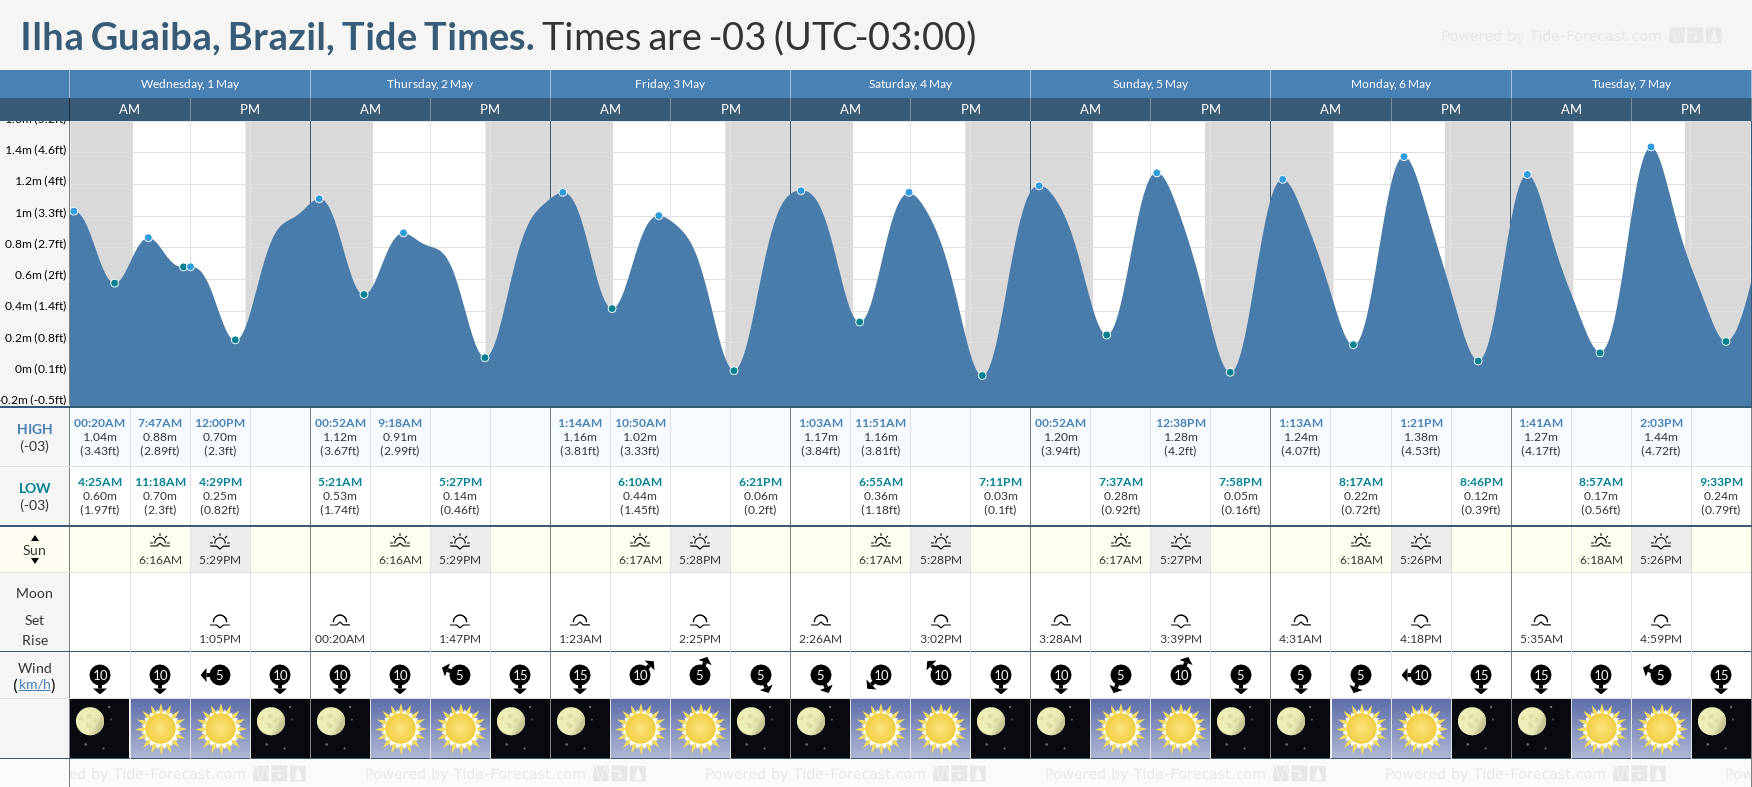 Ilha Guaiba, Brazil Tide Chart including high and low tide tide times for the next 7 days